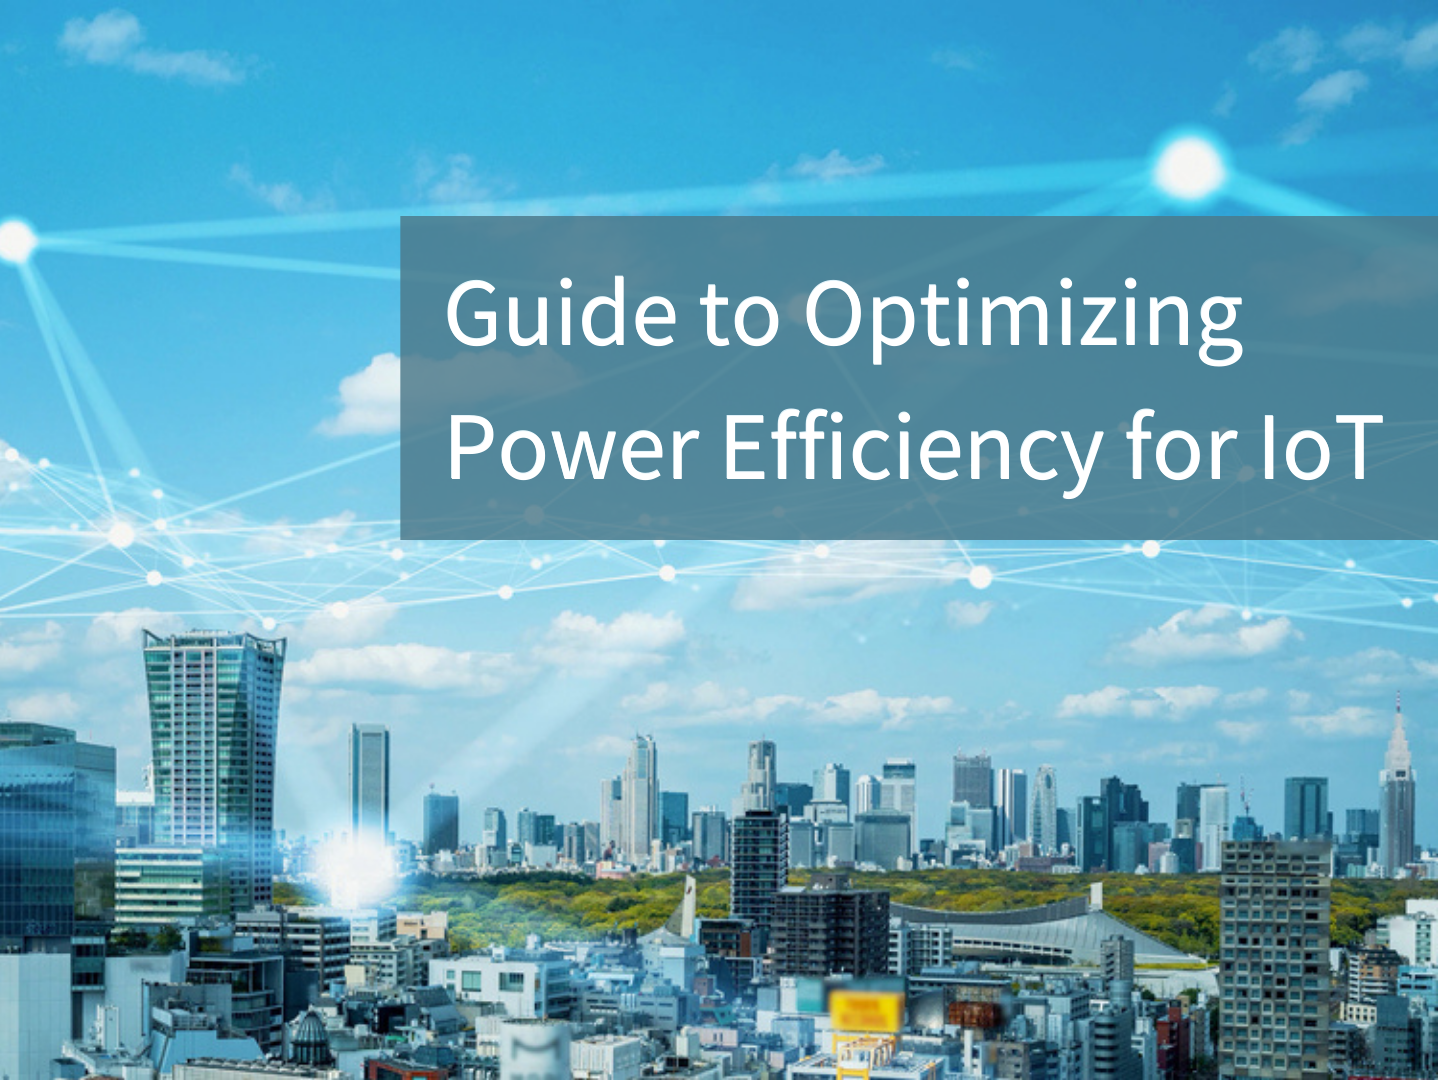 Guide to Optimizing Power Efficiency for IoT